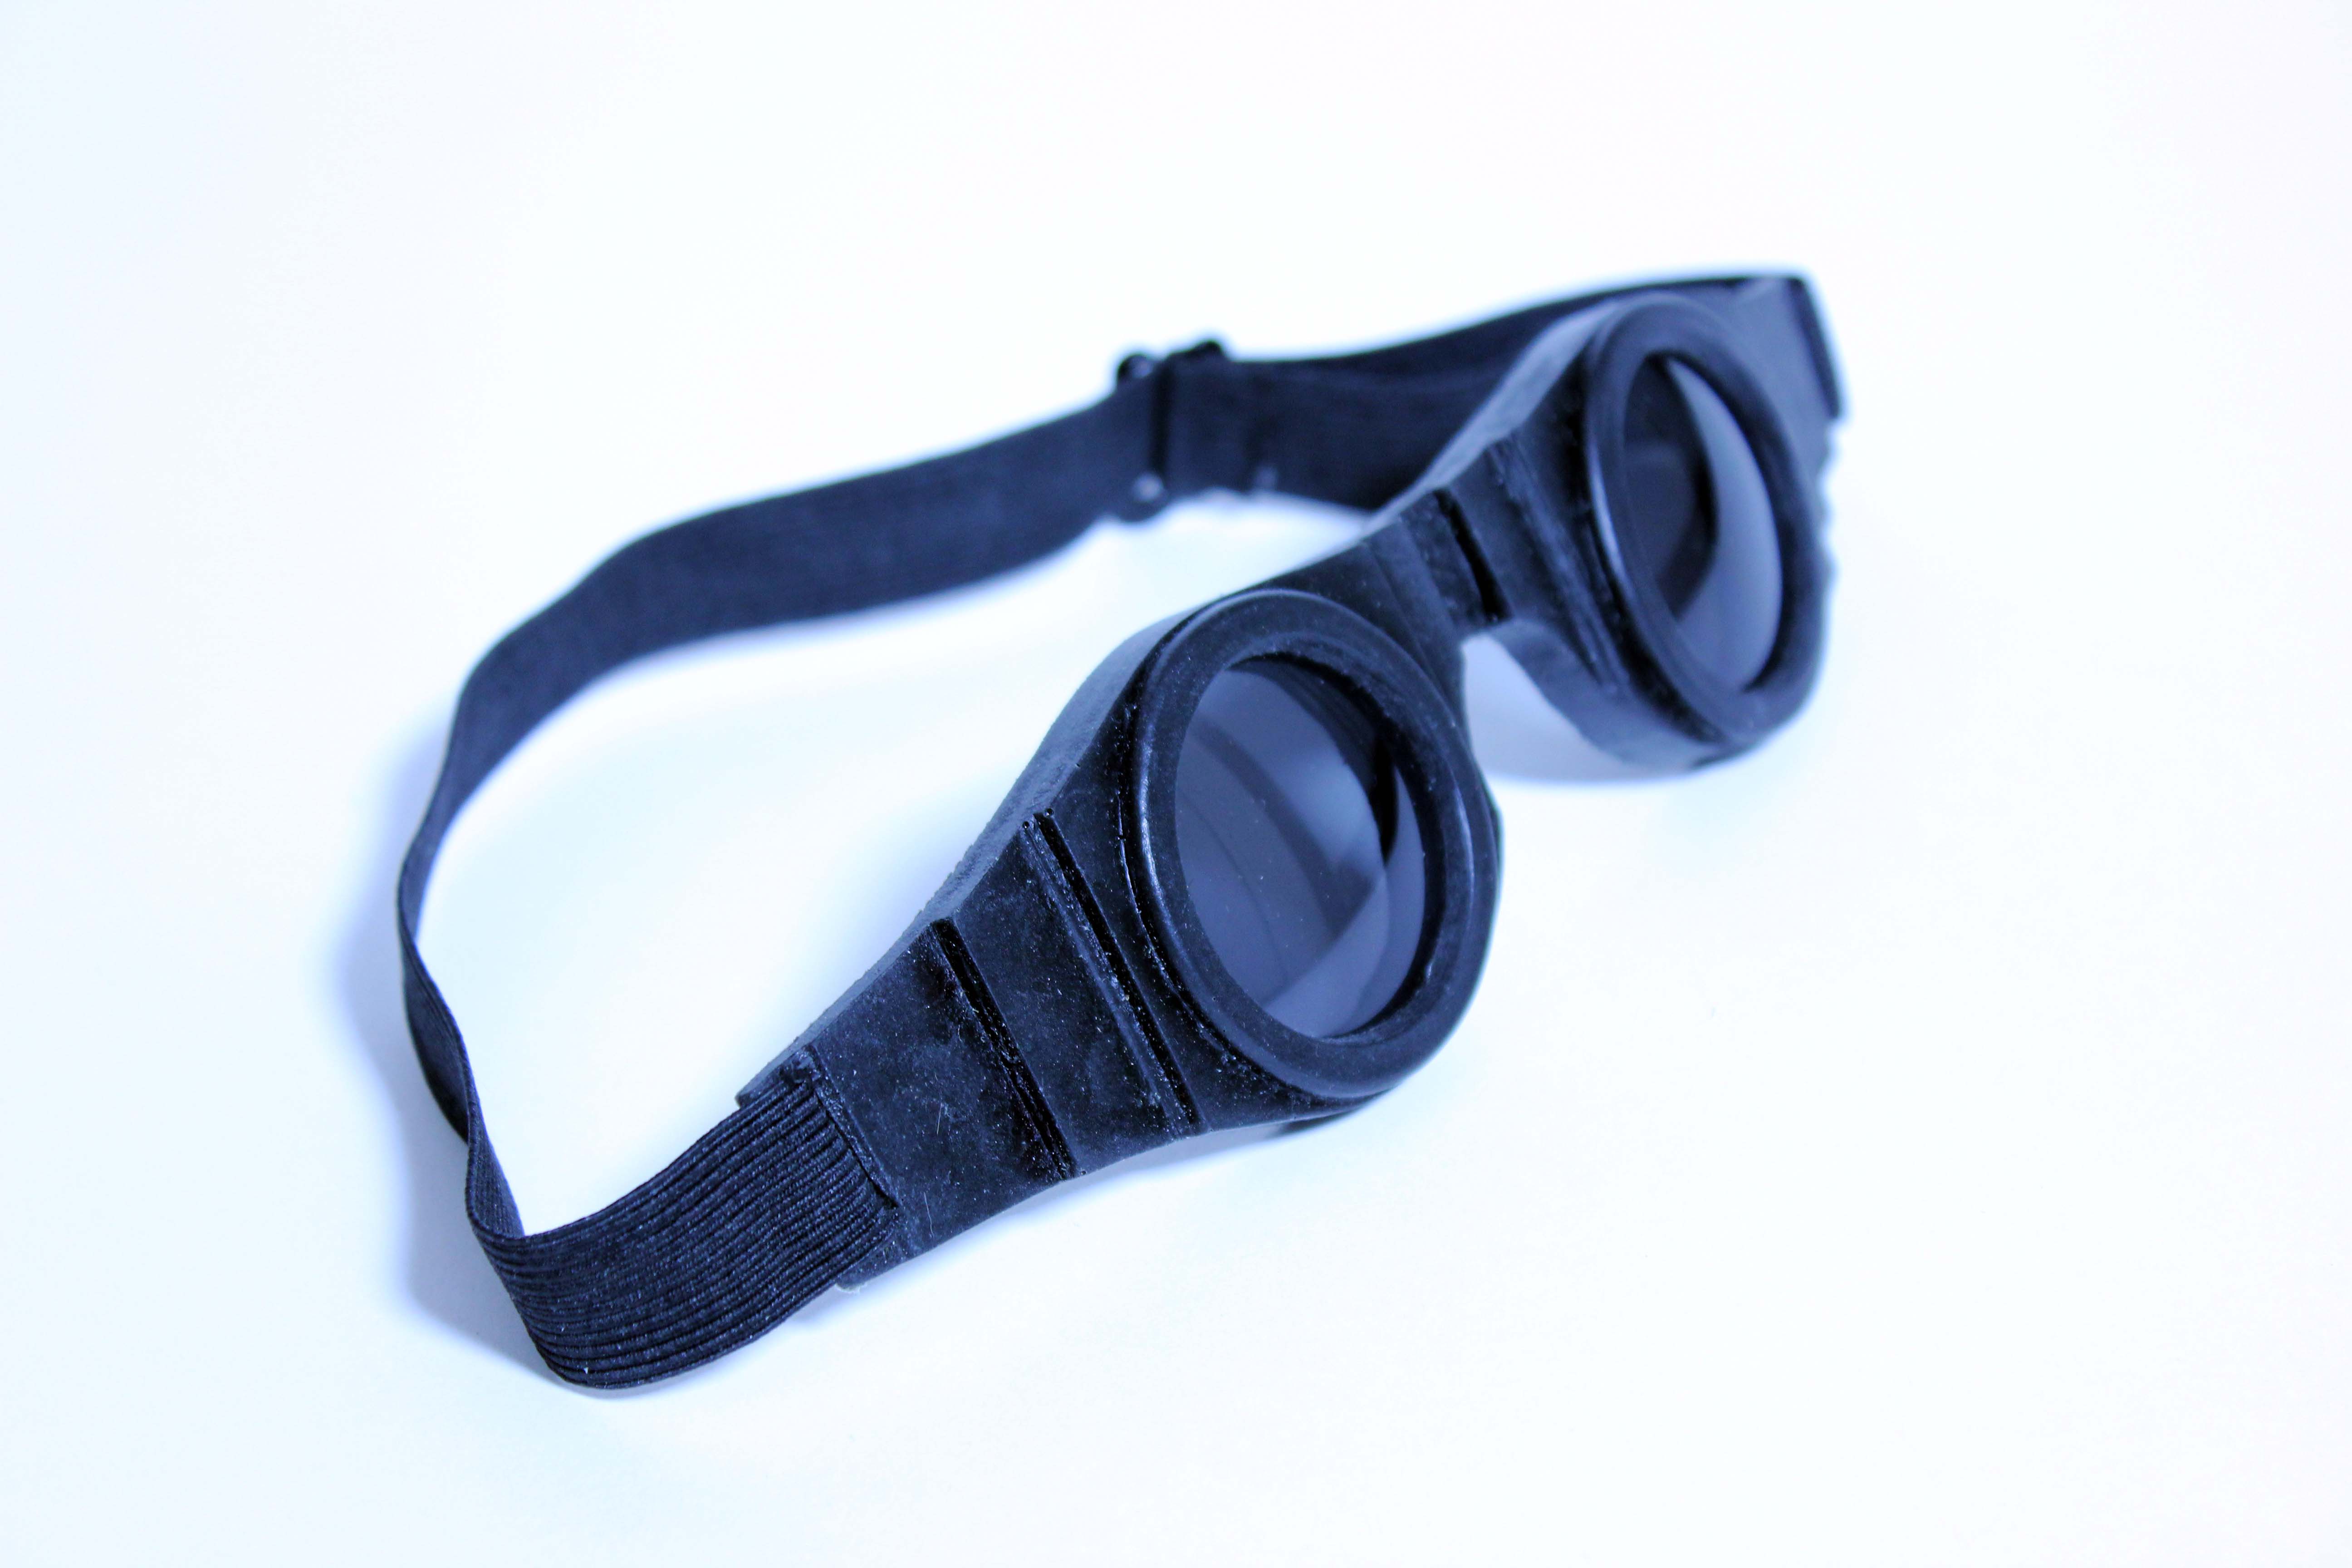 Riddick Goggles from "Pitch Black" and "The Chronicles of Riddick" | RPF  Costume and Prop Maker Community